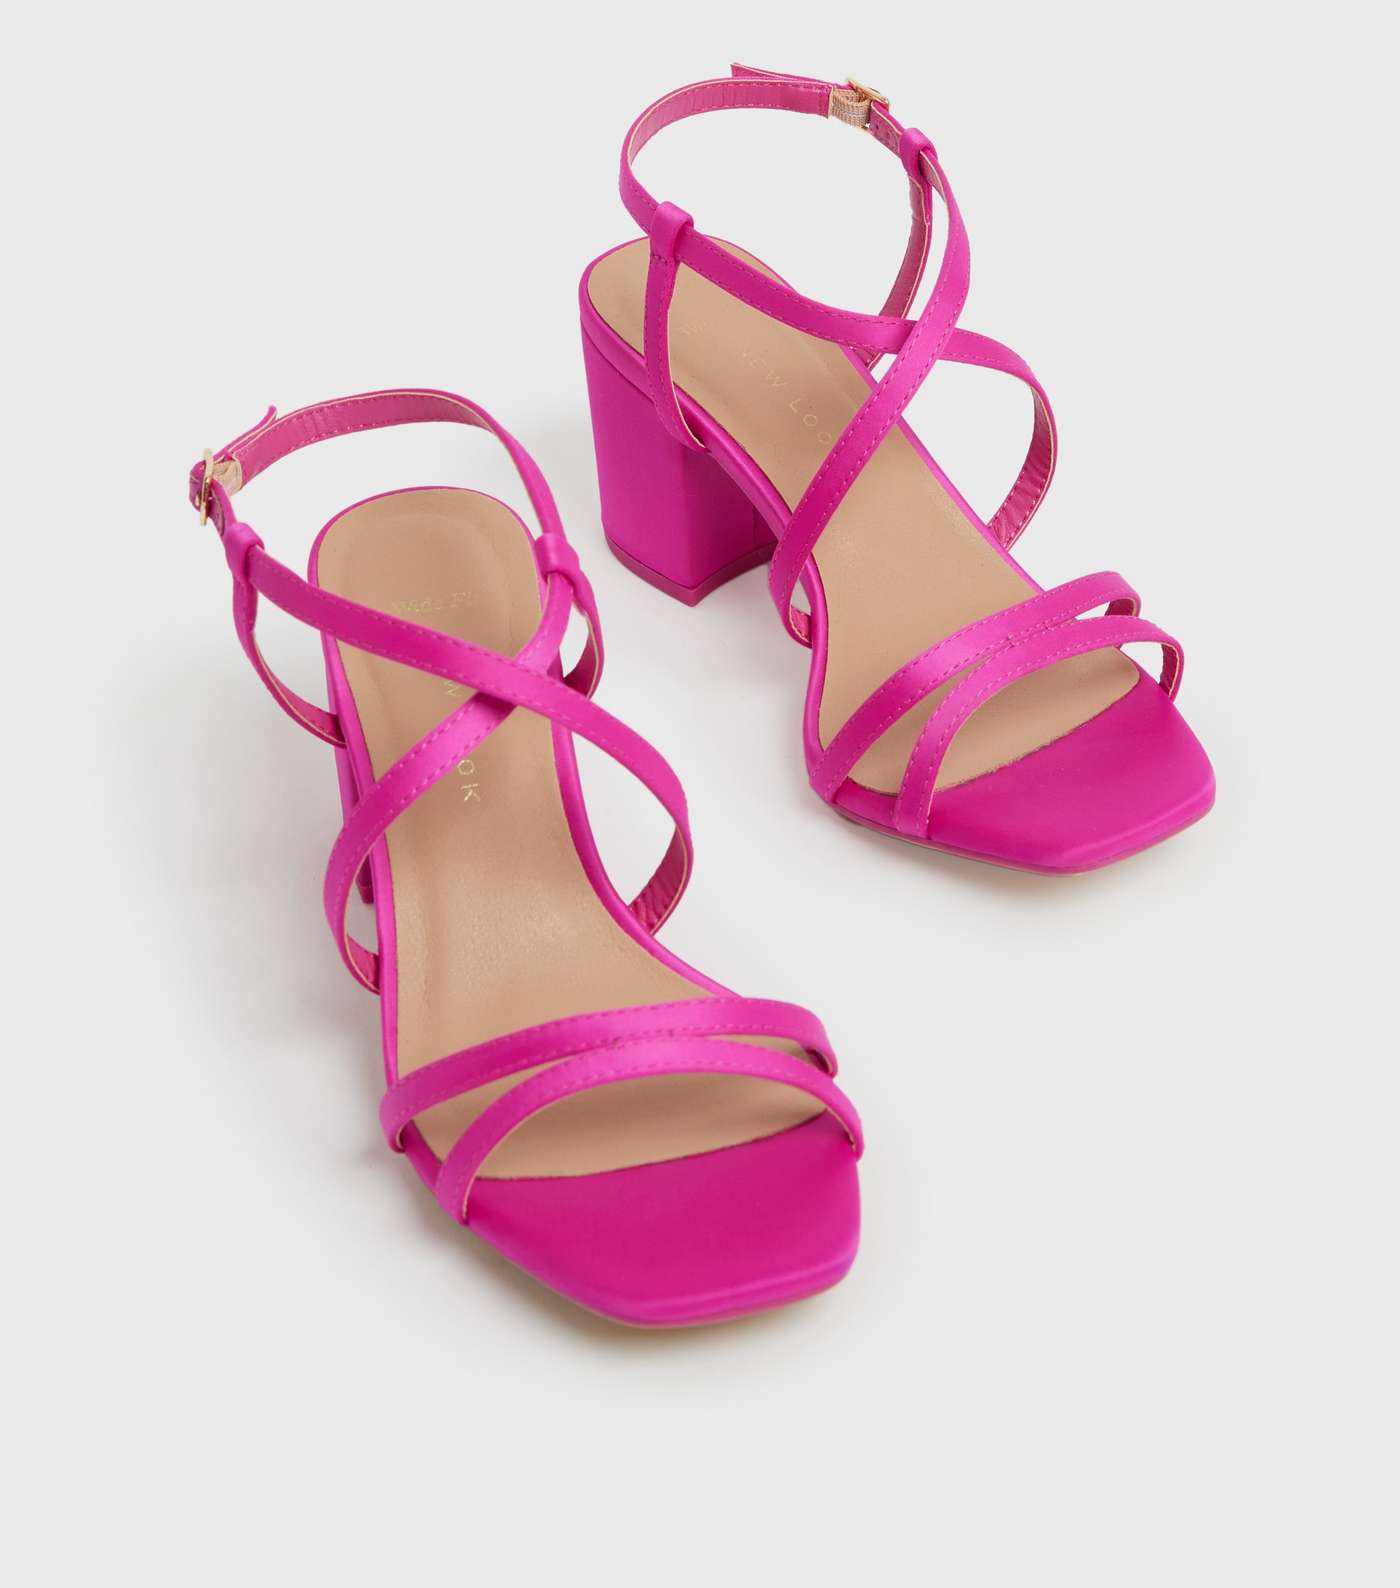 Wide Fit Bright Pink Satin Strappy Block Heel Sandals Image 3